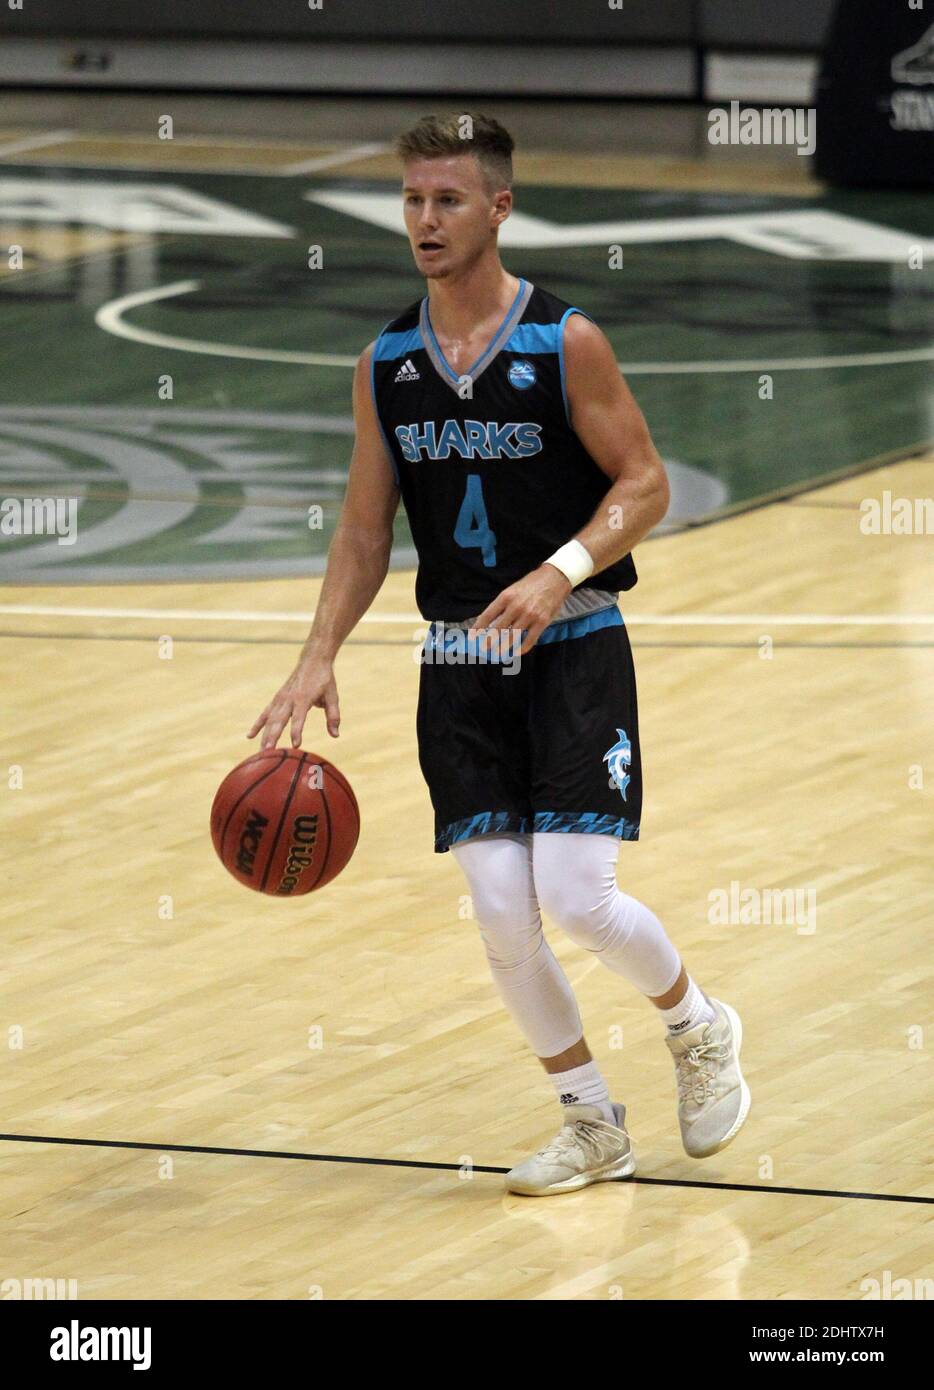 December 11, 2020 - Hawaii Pacific Sharks guard David Rowlands #4 brings the ball up court during a game between the Hawaii Rainbow Warriors and the Hawaii Pacific Sharks at SimpliFi Arena at the Stan Sheriff Center in Honolulu, HI - Michael Sullivan/CSM Stock Photo